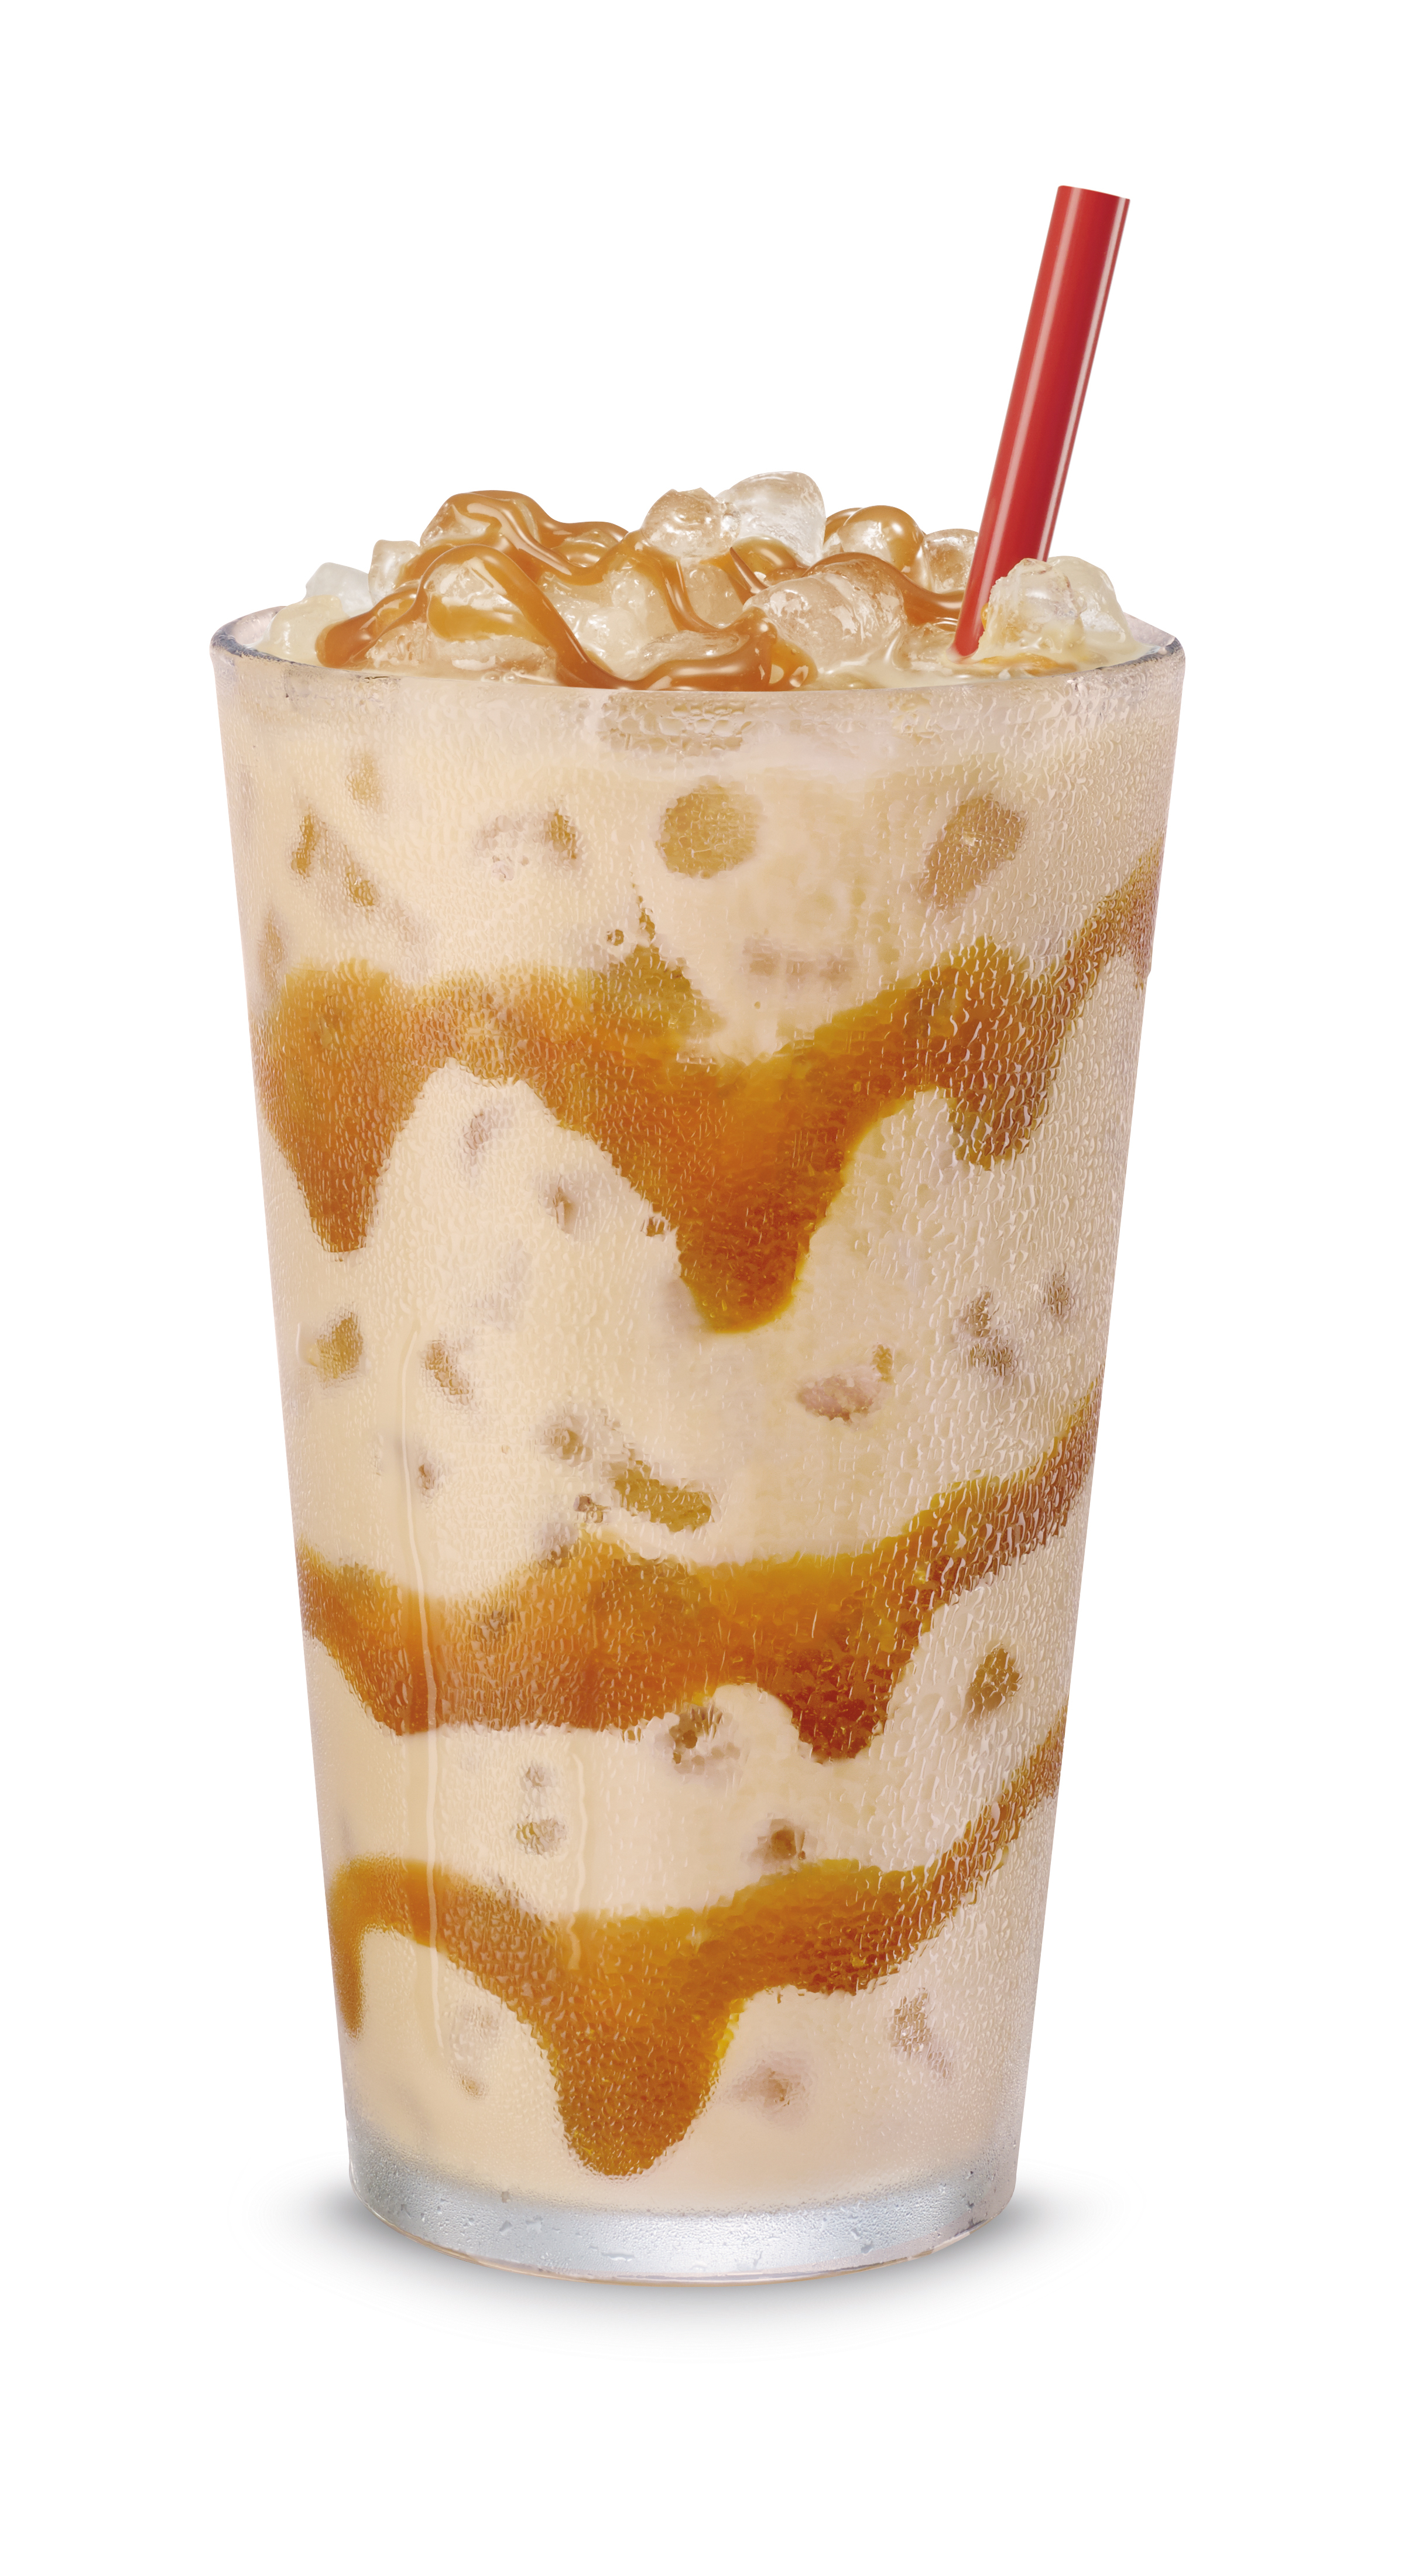 SONIC Adds an Iced Coffee Twist You Can't Resist | Business Wire